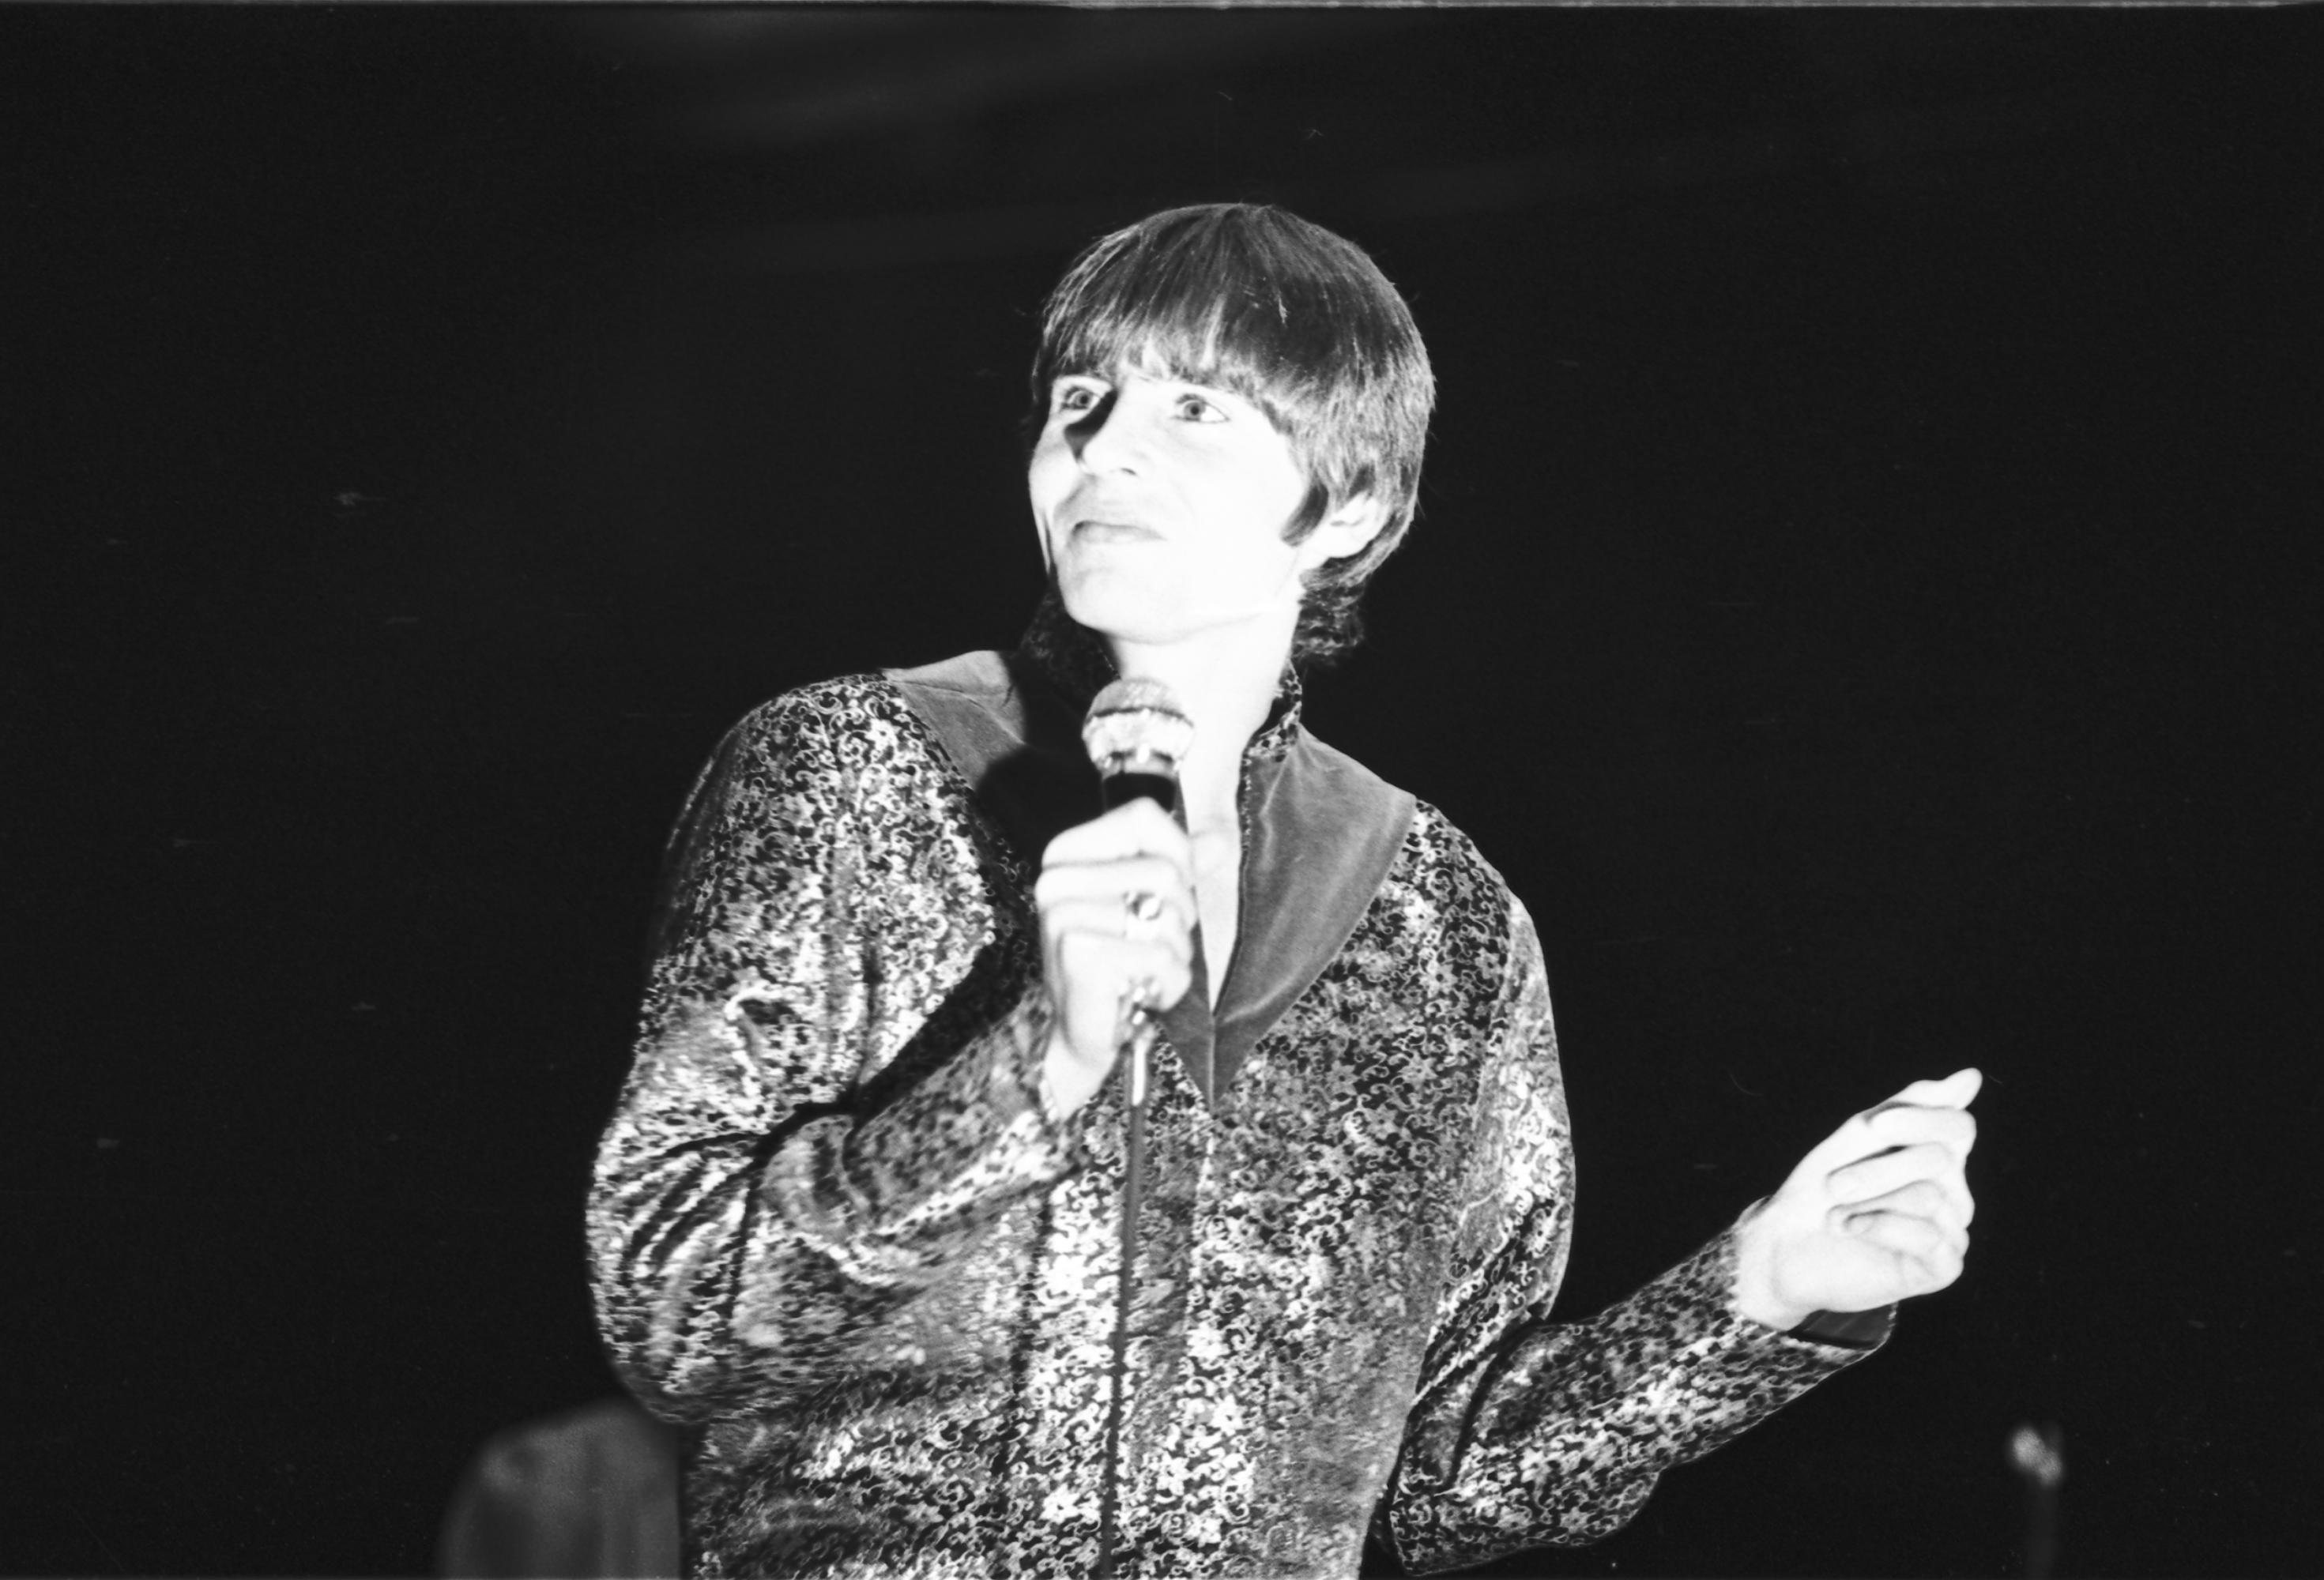 Davy Jones with a microphone